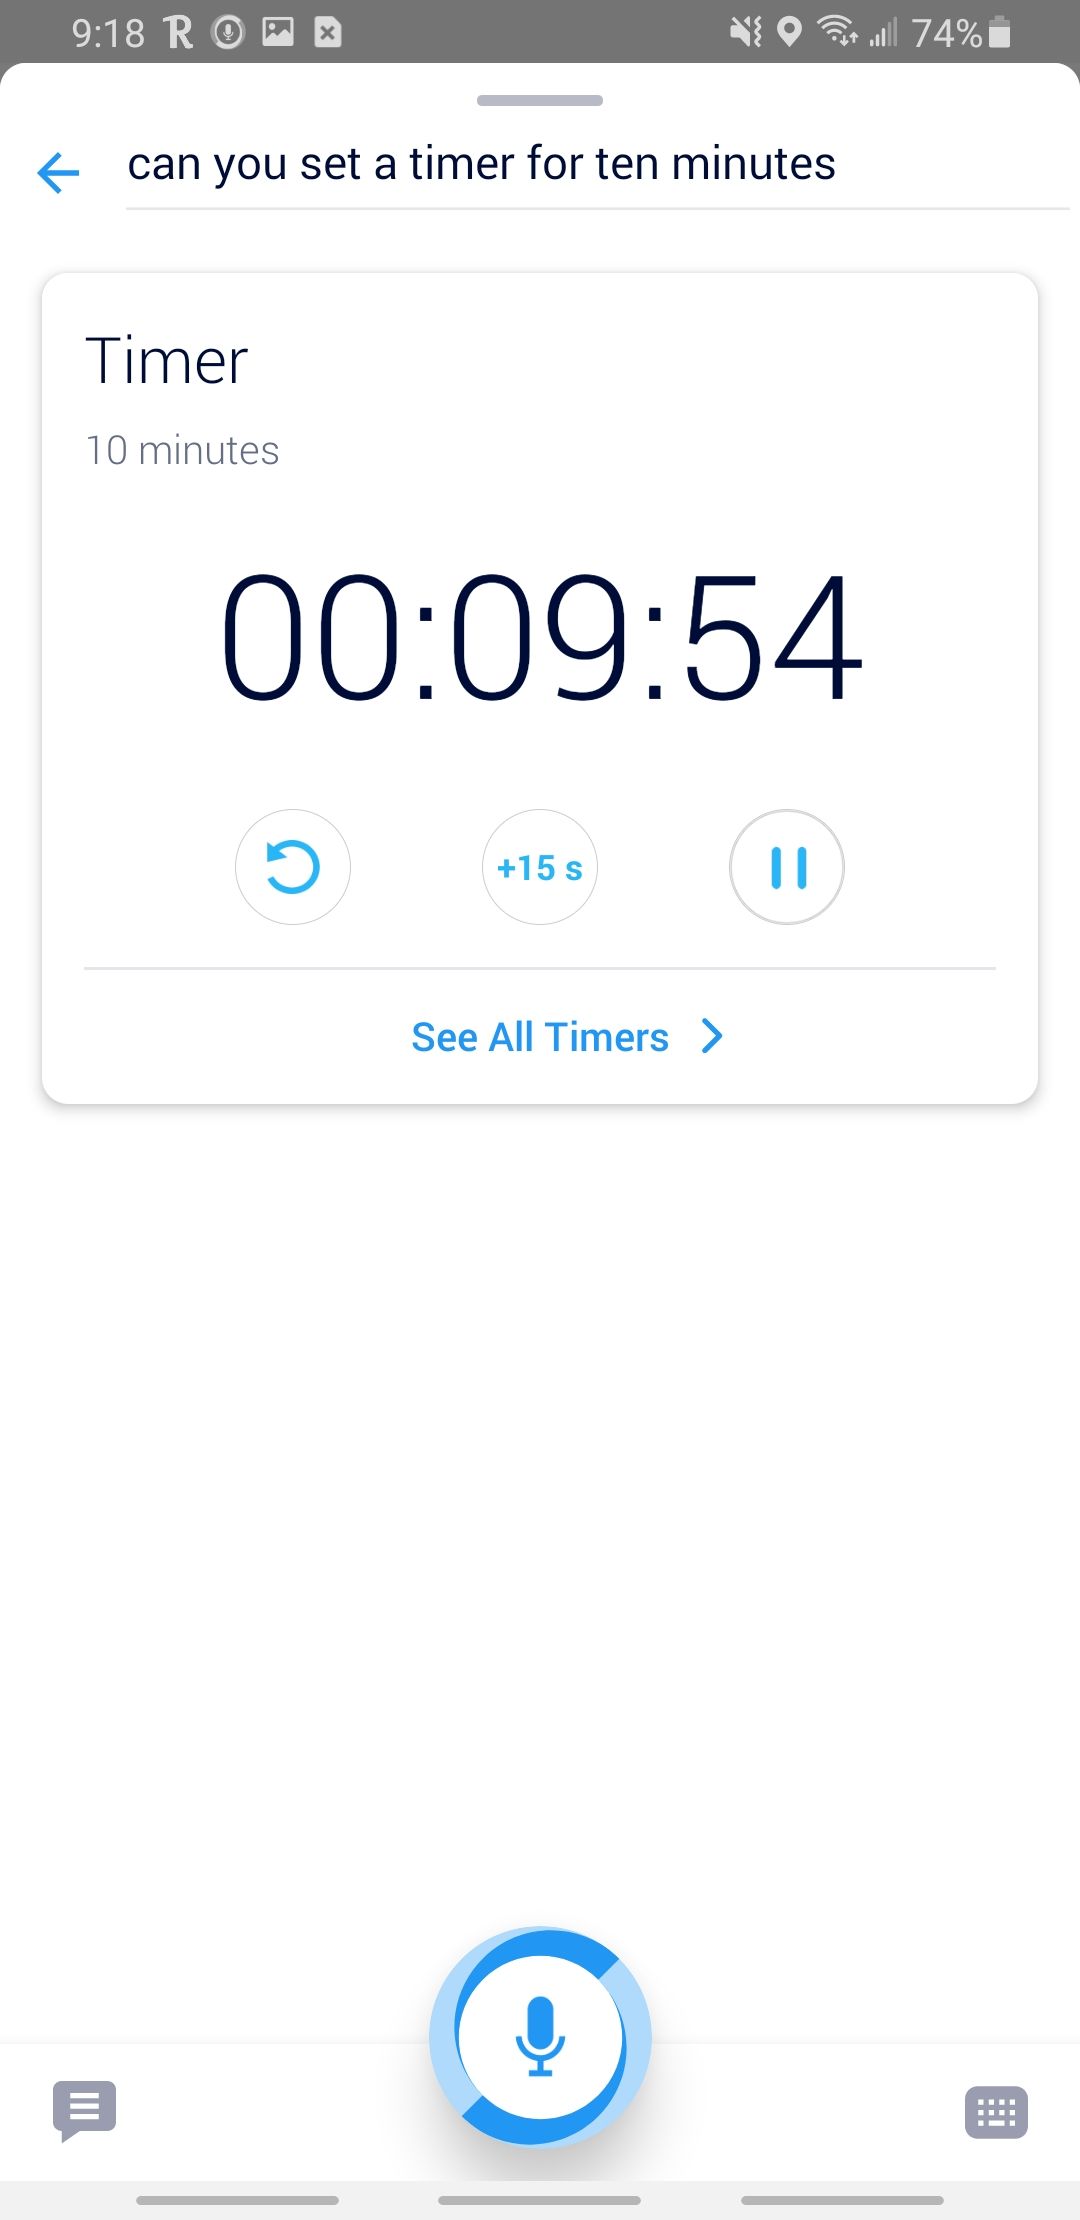 hound app setting a timer for ten minutes